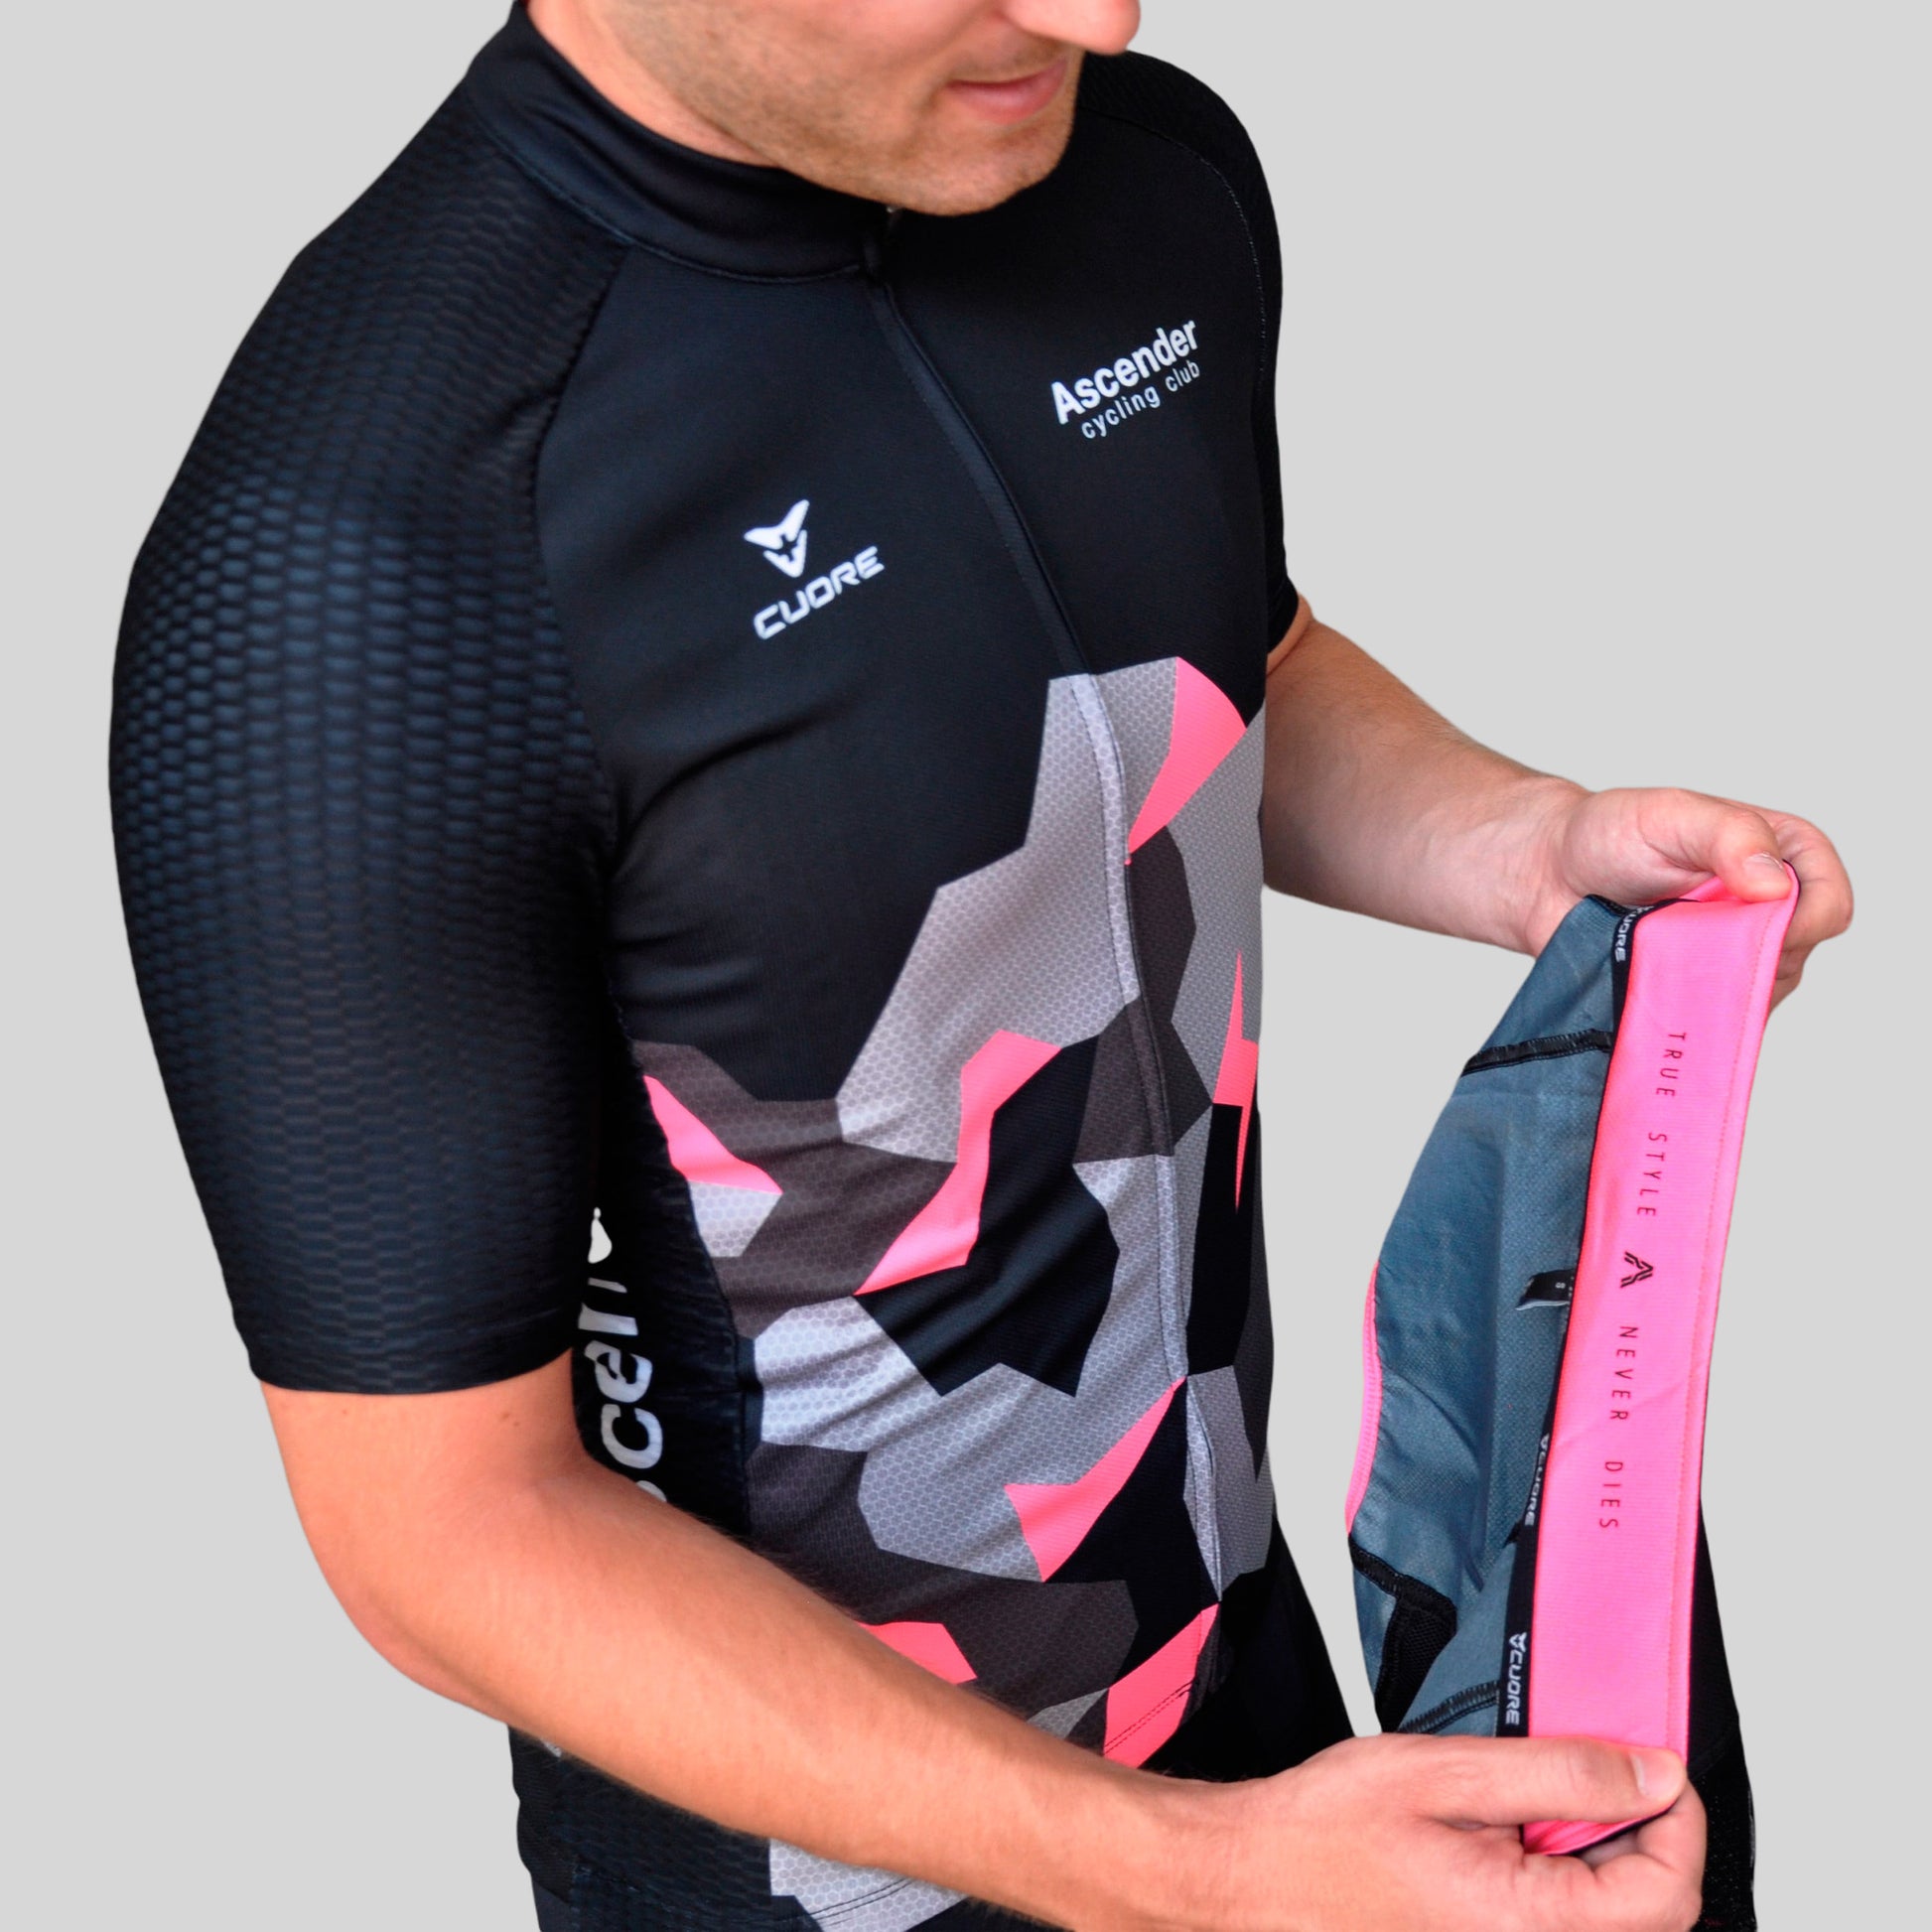 LB Camo Pink Windshield Mesh Vest from Ascender Cycling Club and Cuore of Switzerland Collar View